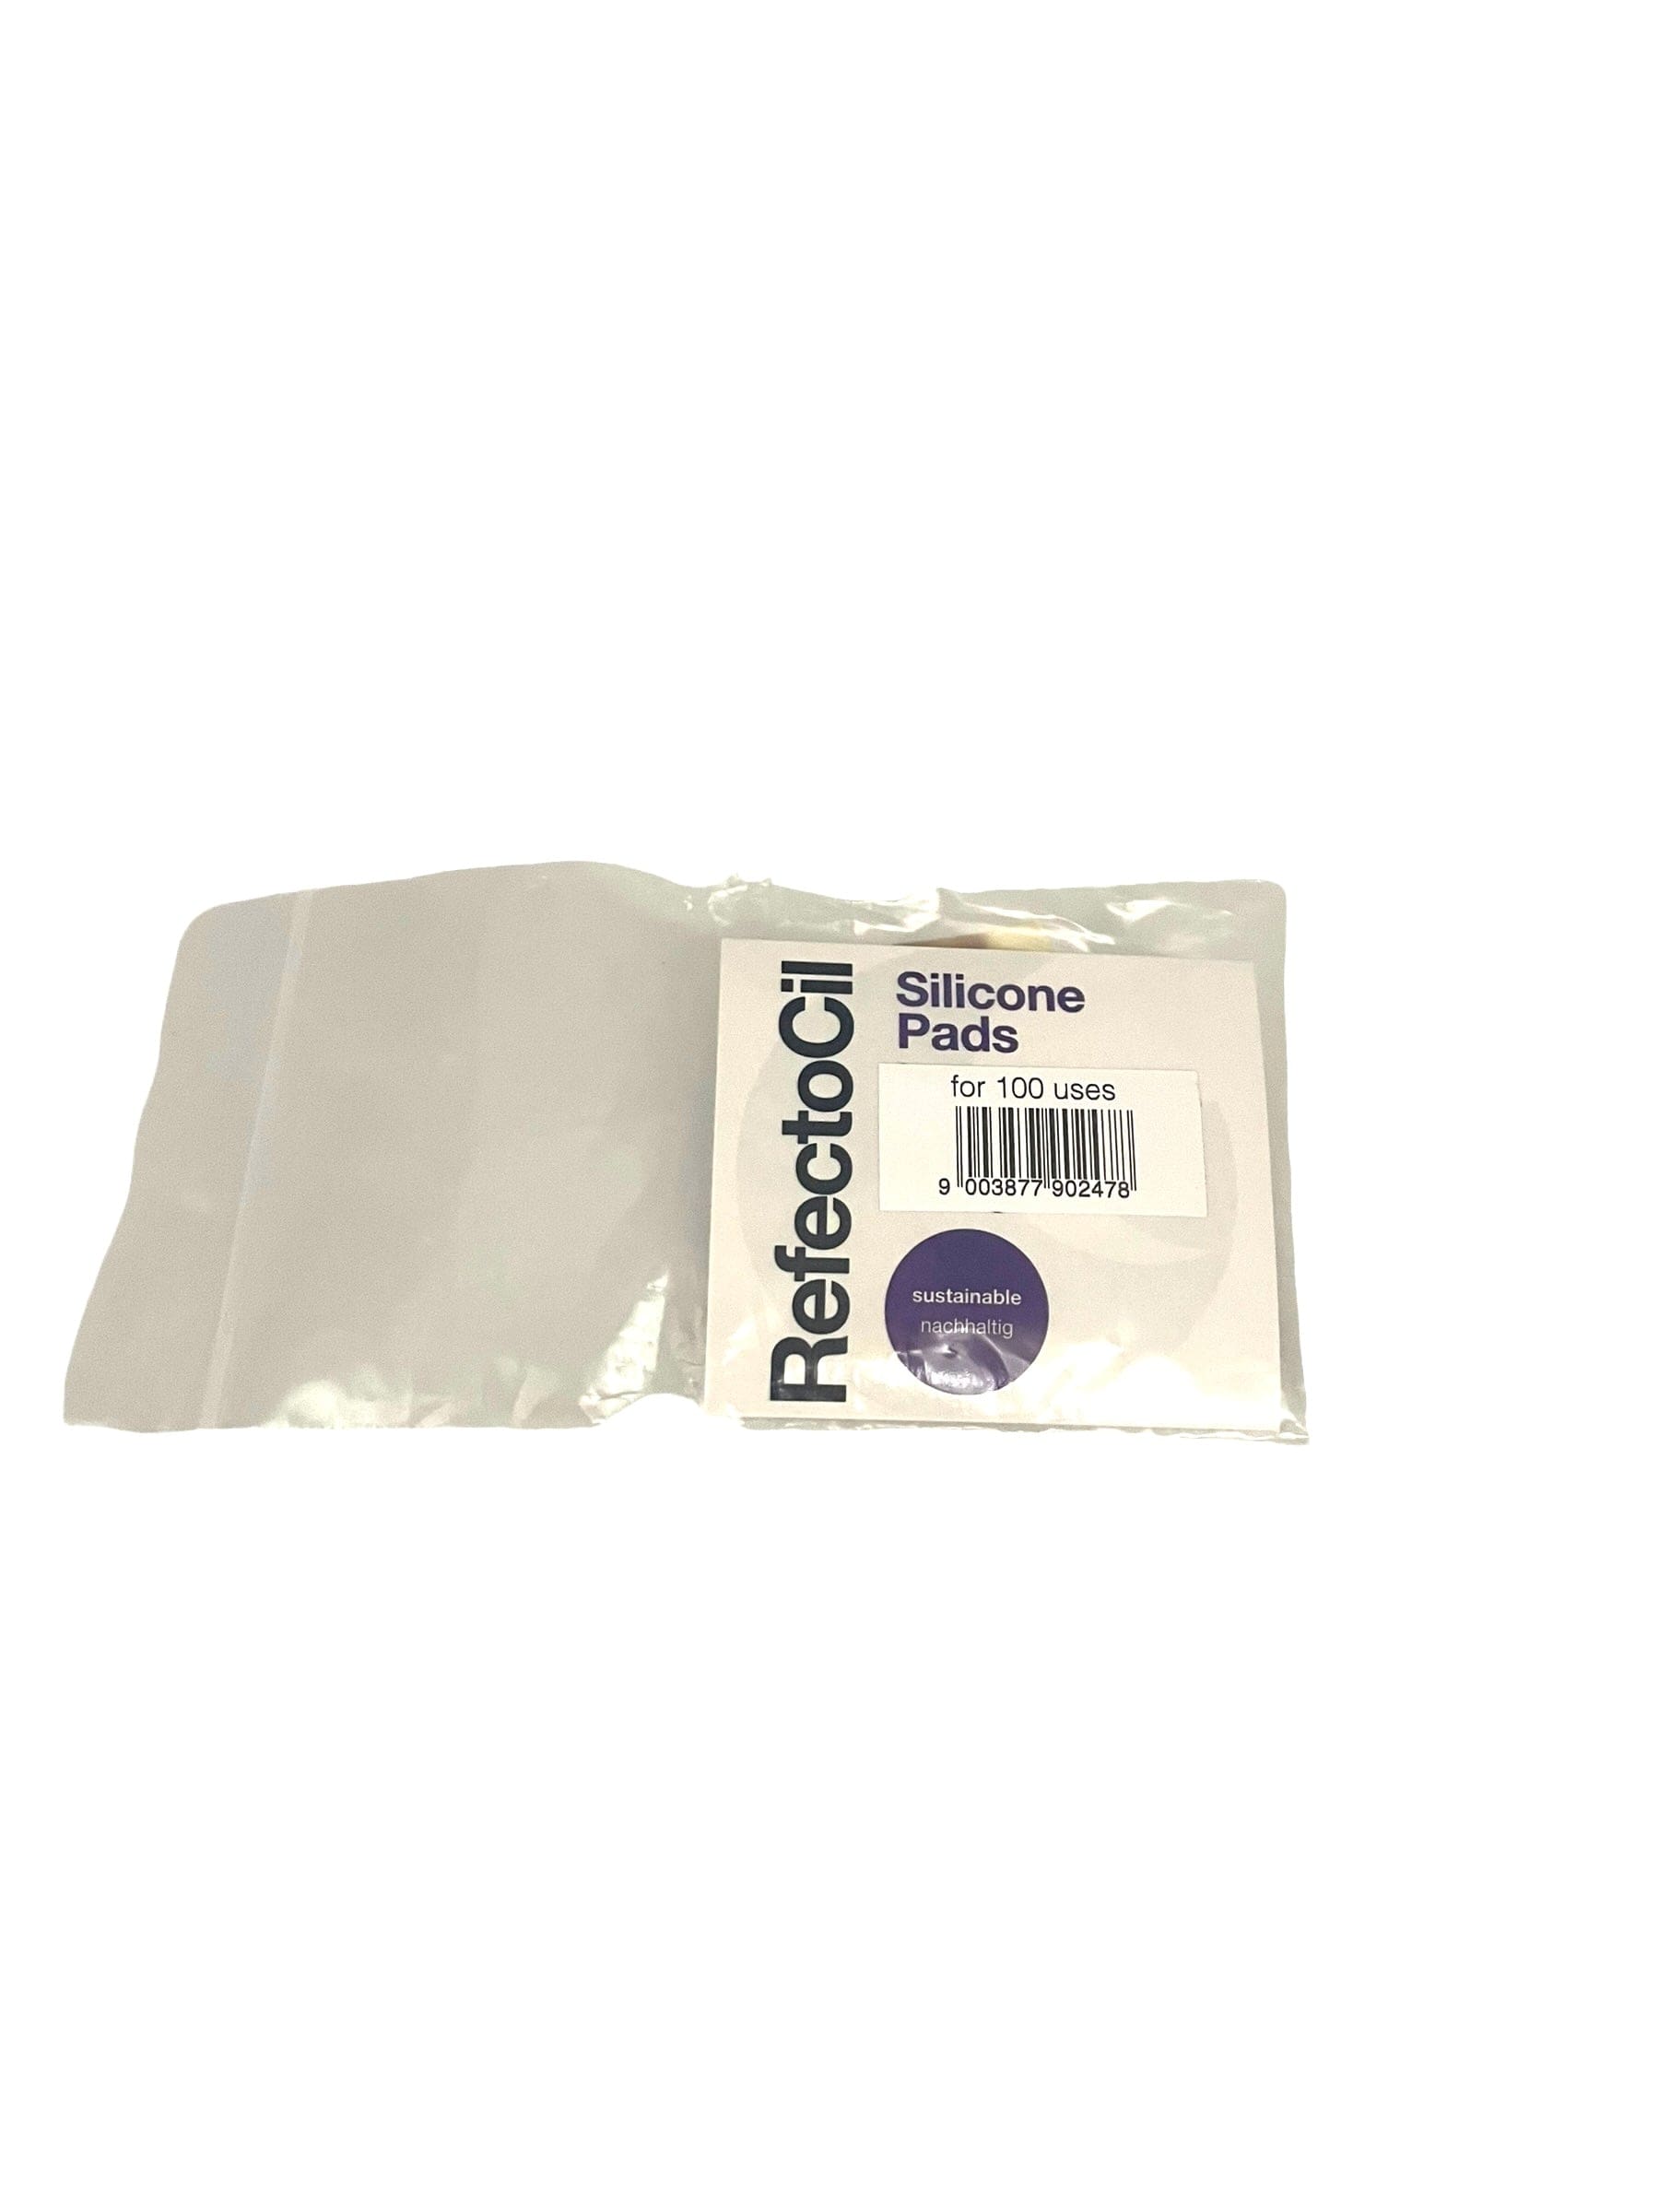 Silicone Eye Pads Under Eye Protection RefectoCil 2pcs